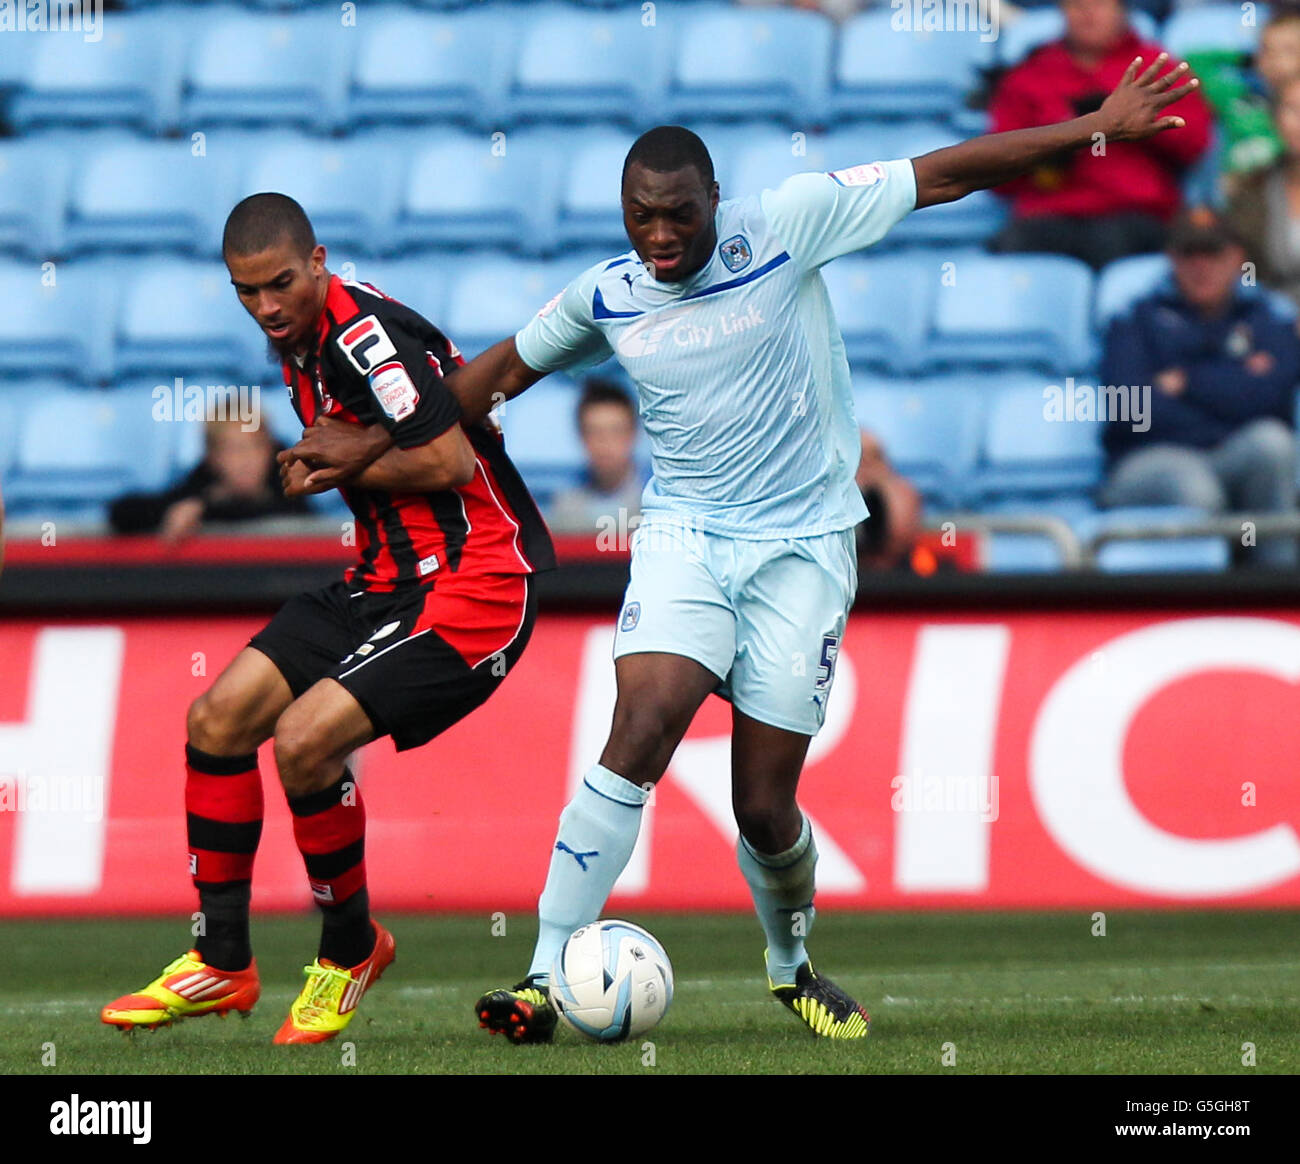 Coventry City's Nathan Cameron holds off the challenge of Bournemouth's Lewis Grabban during the npower Football League One match at the Ricoh Arena, Coventry. Stock Photo